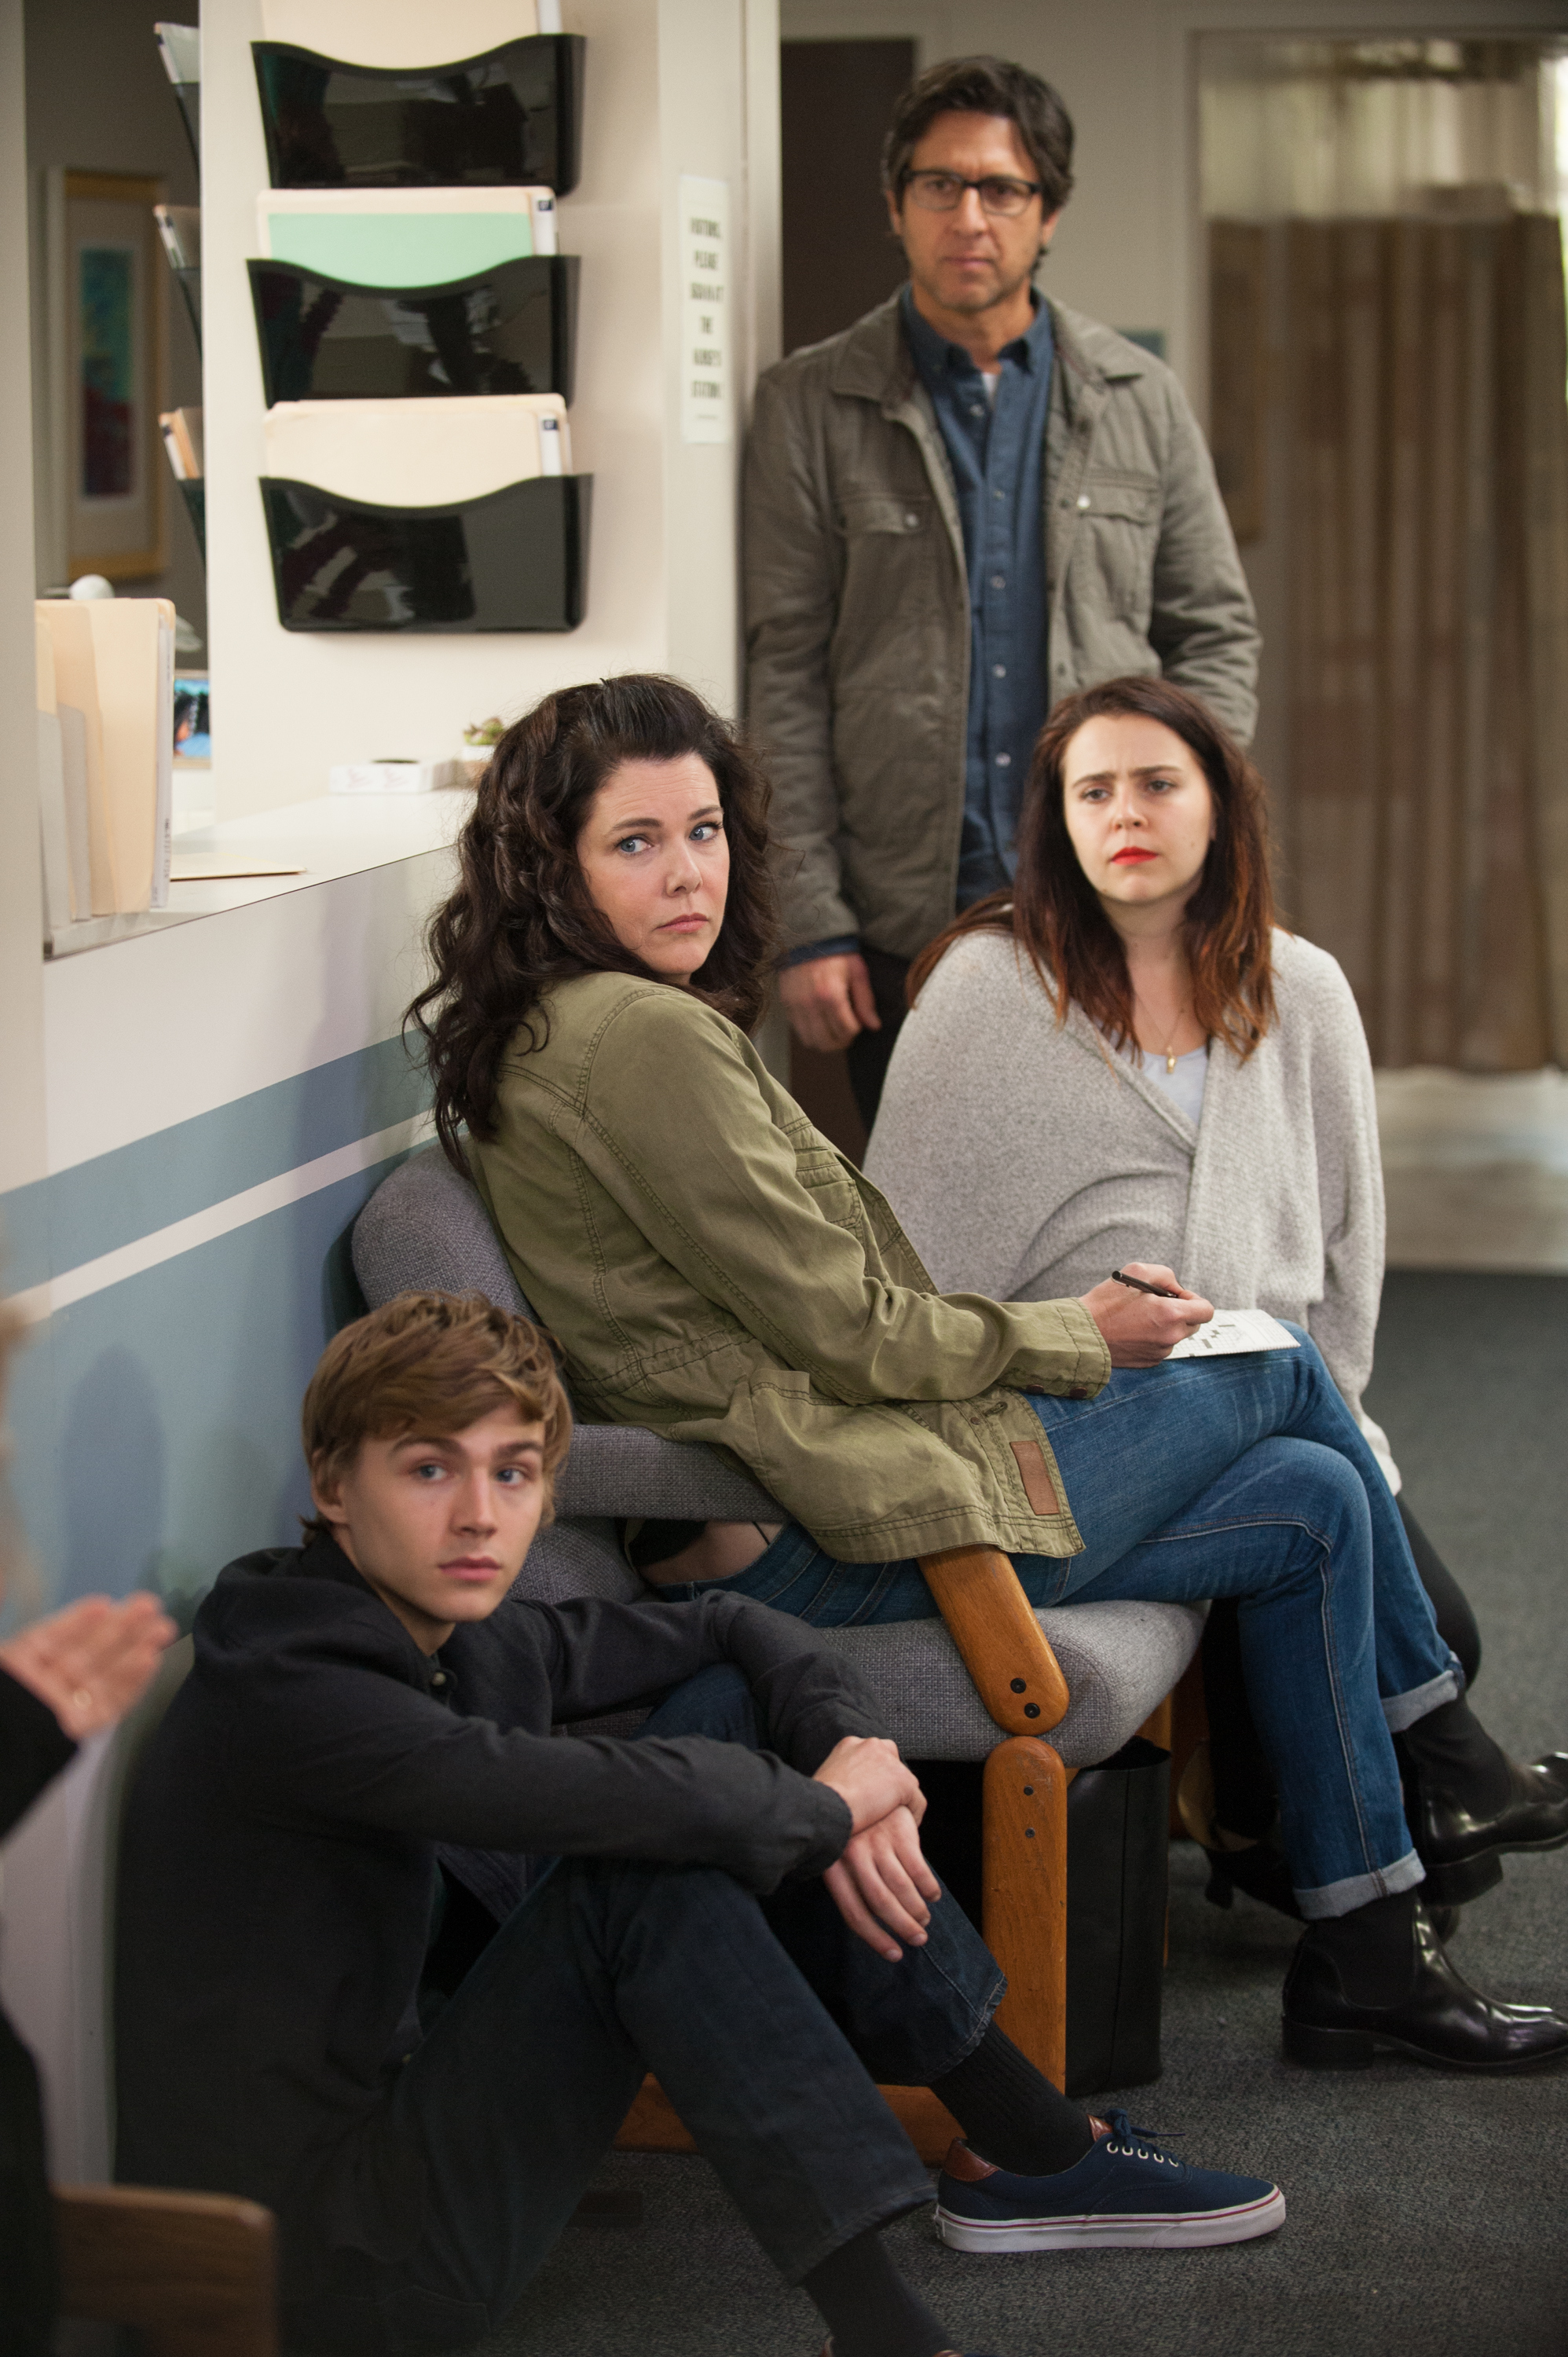 From left: Miles Heizer as Drew Holt, Lauren Graham as Sarah Braverman, Mae Whitman as Amber Holt and Ray Romano as Hank Rizzoli in the "How Did We Get Here?" episode of <i>Parenthood</i>. (NBC—Getty Images/2014 NBCUniversal Media, LLC)